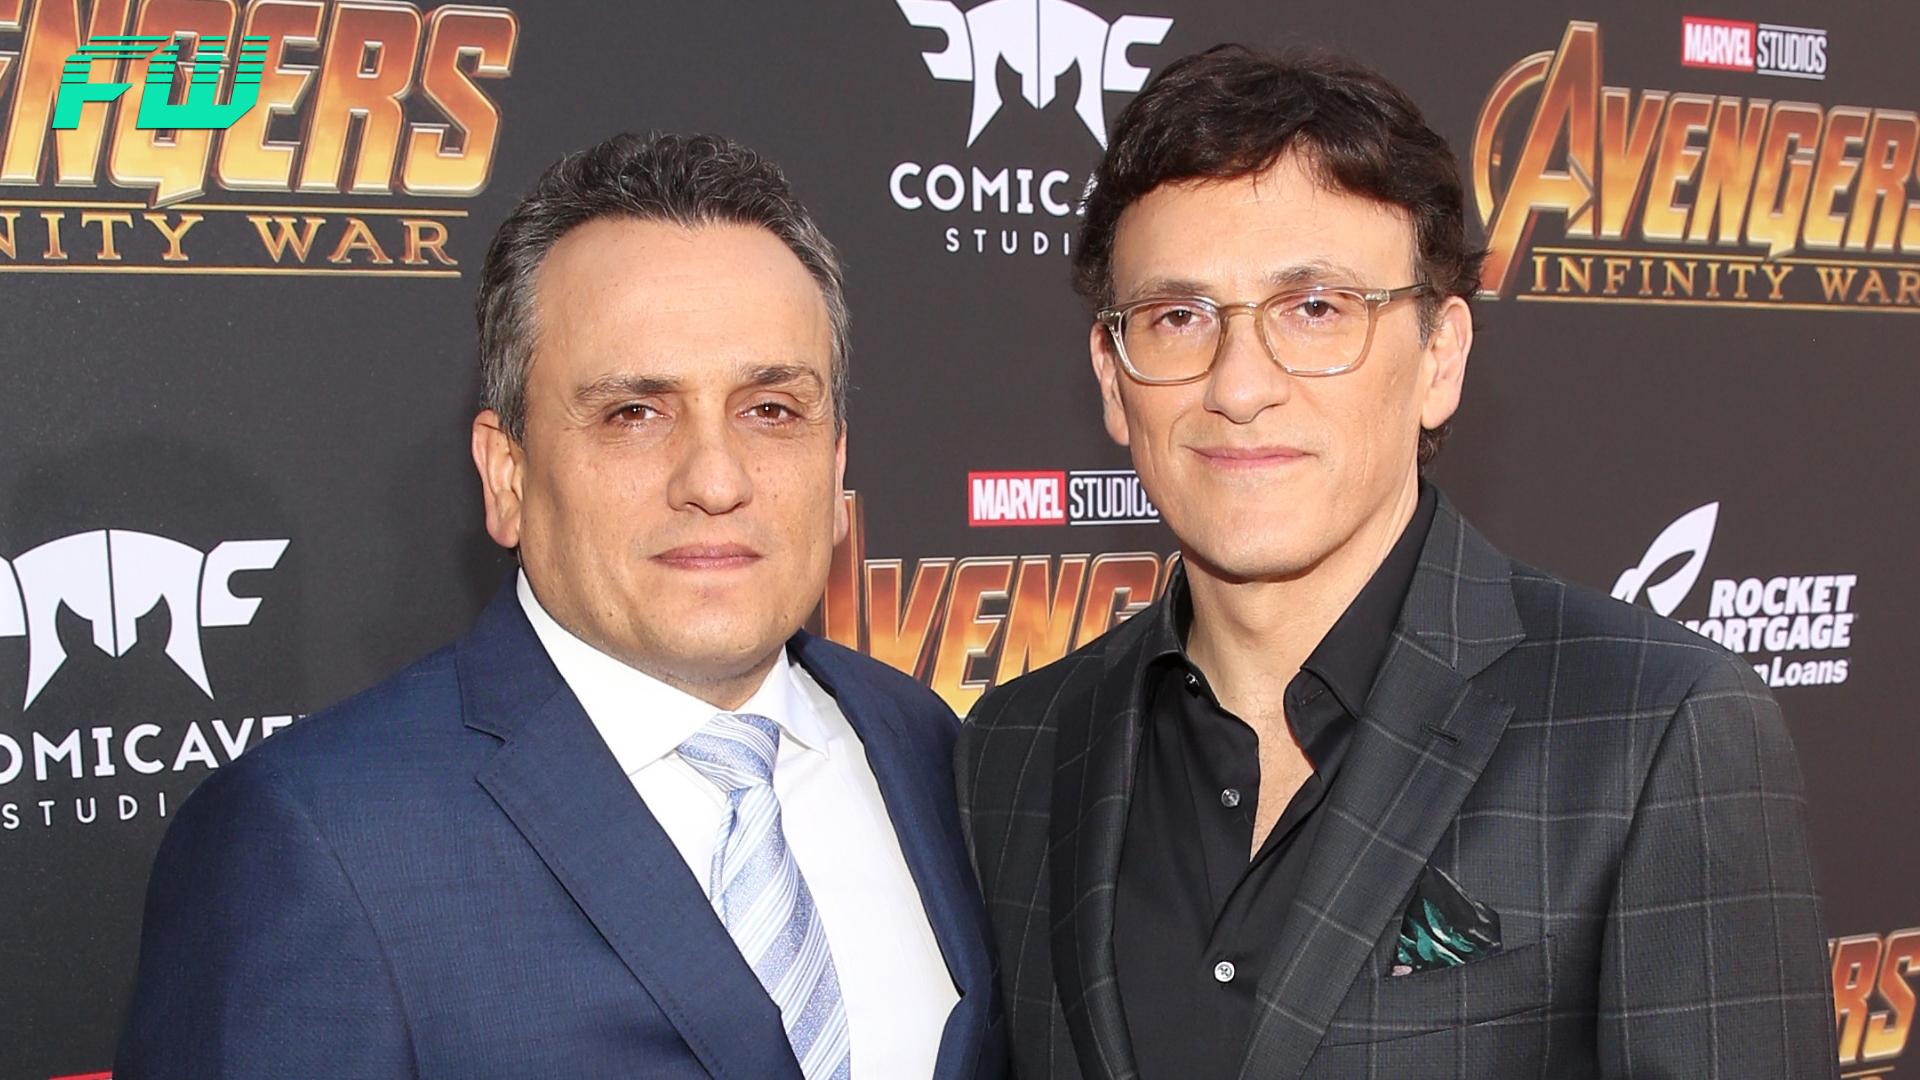 Russo Brothers take a dig on Disney+ and praise Netflix